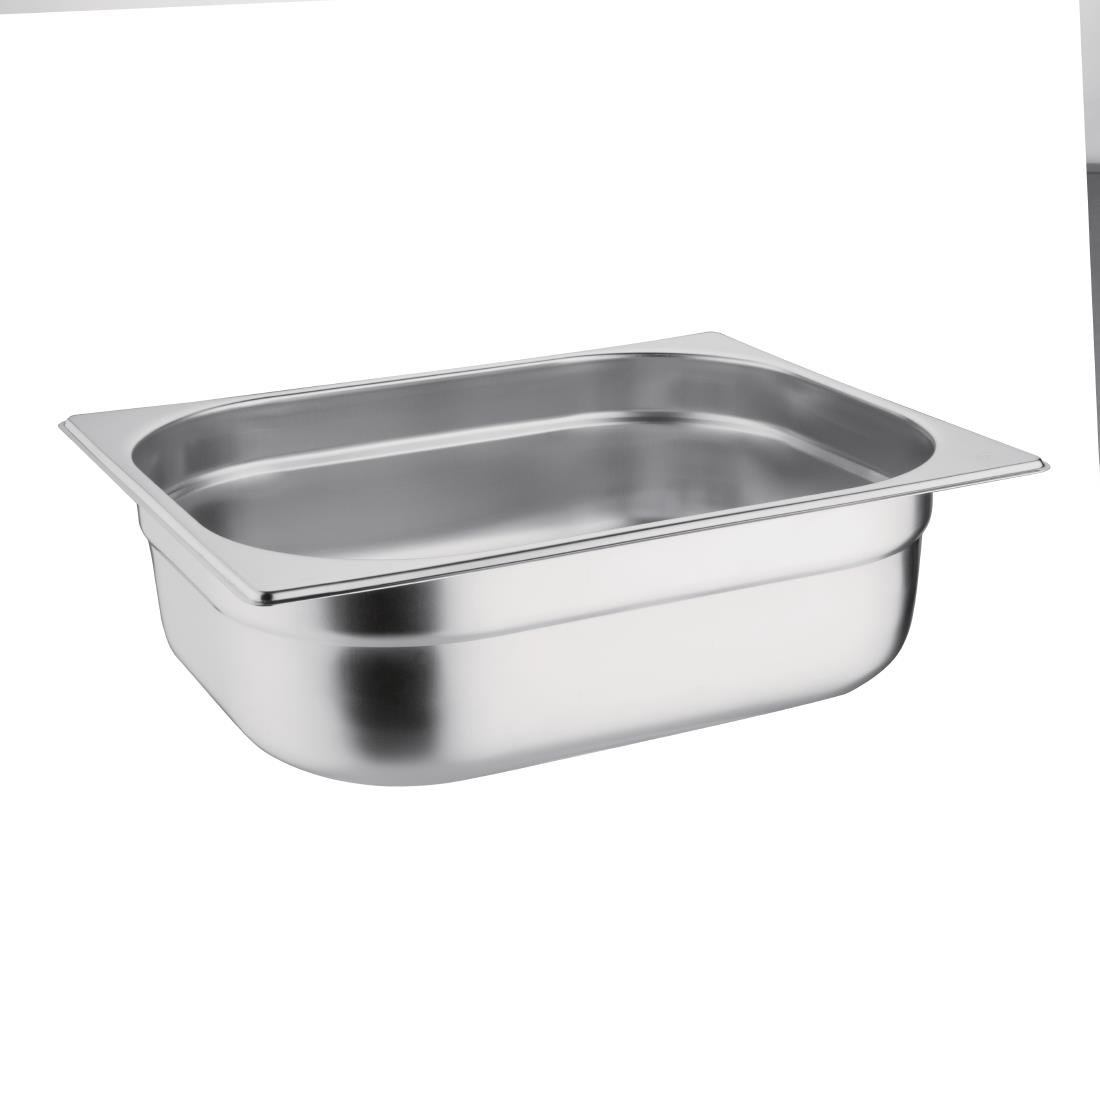 Stainless Steel Gastronorm 1/2 10cm Deep (K928)